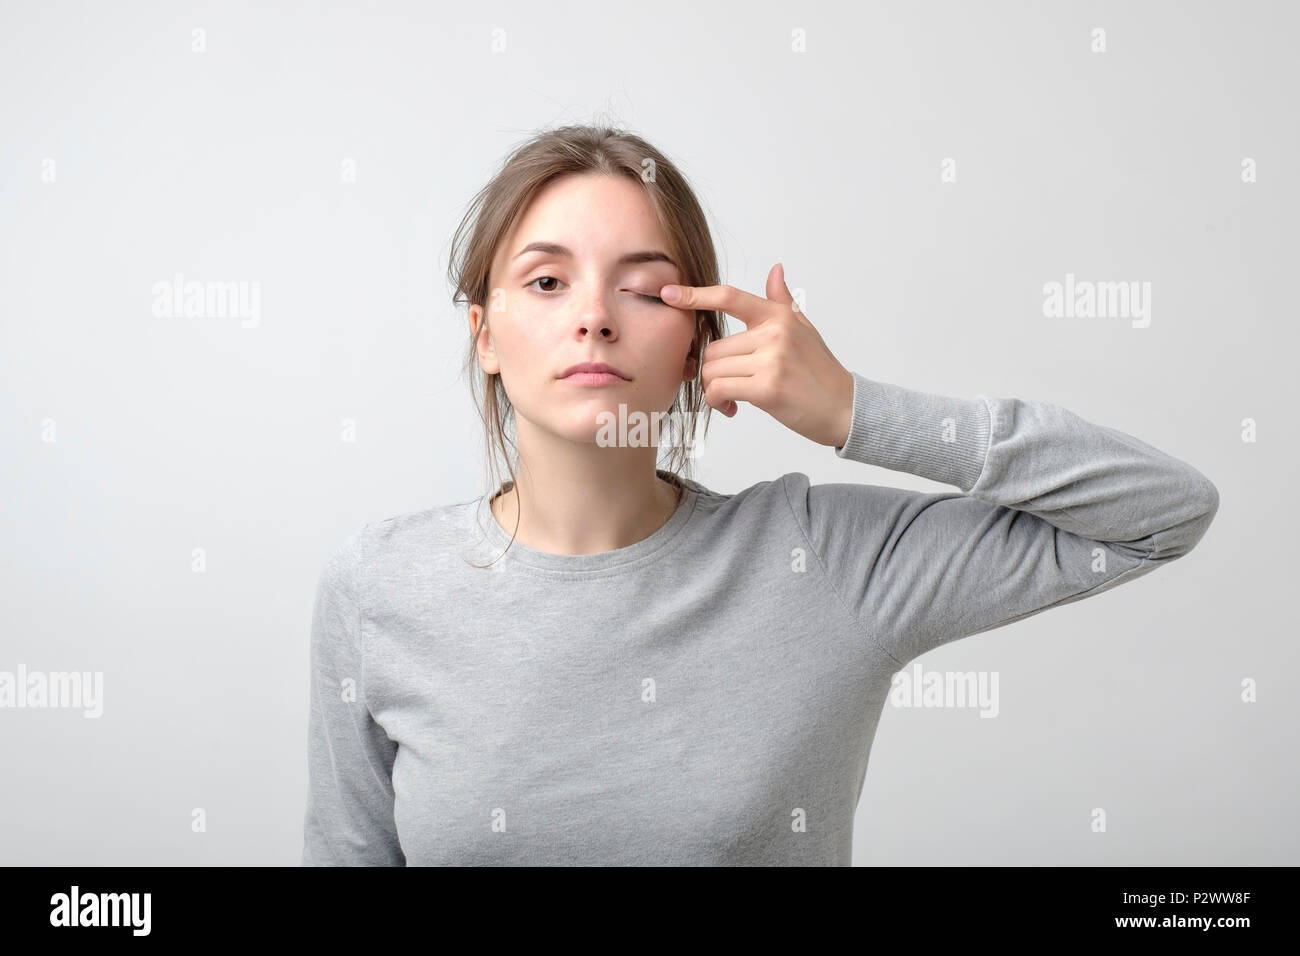 The woman is touching her eye to show that she has problem with eyesight. Health trouble. Concept of miopia or astigmatism Stock Photo